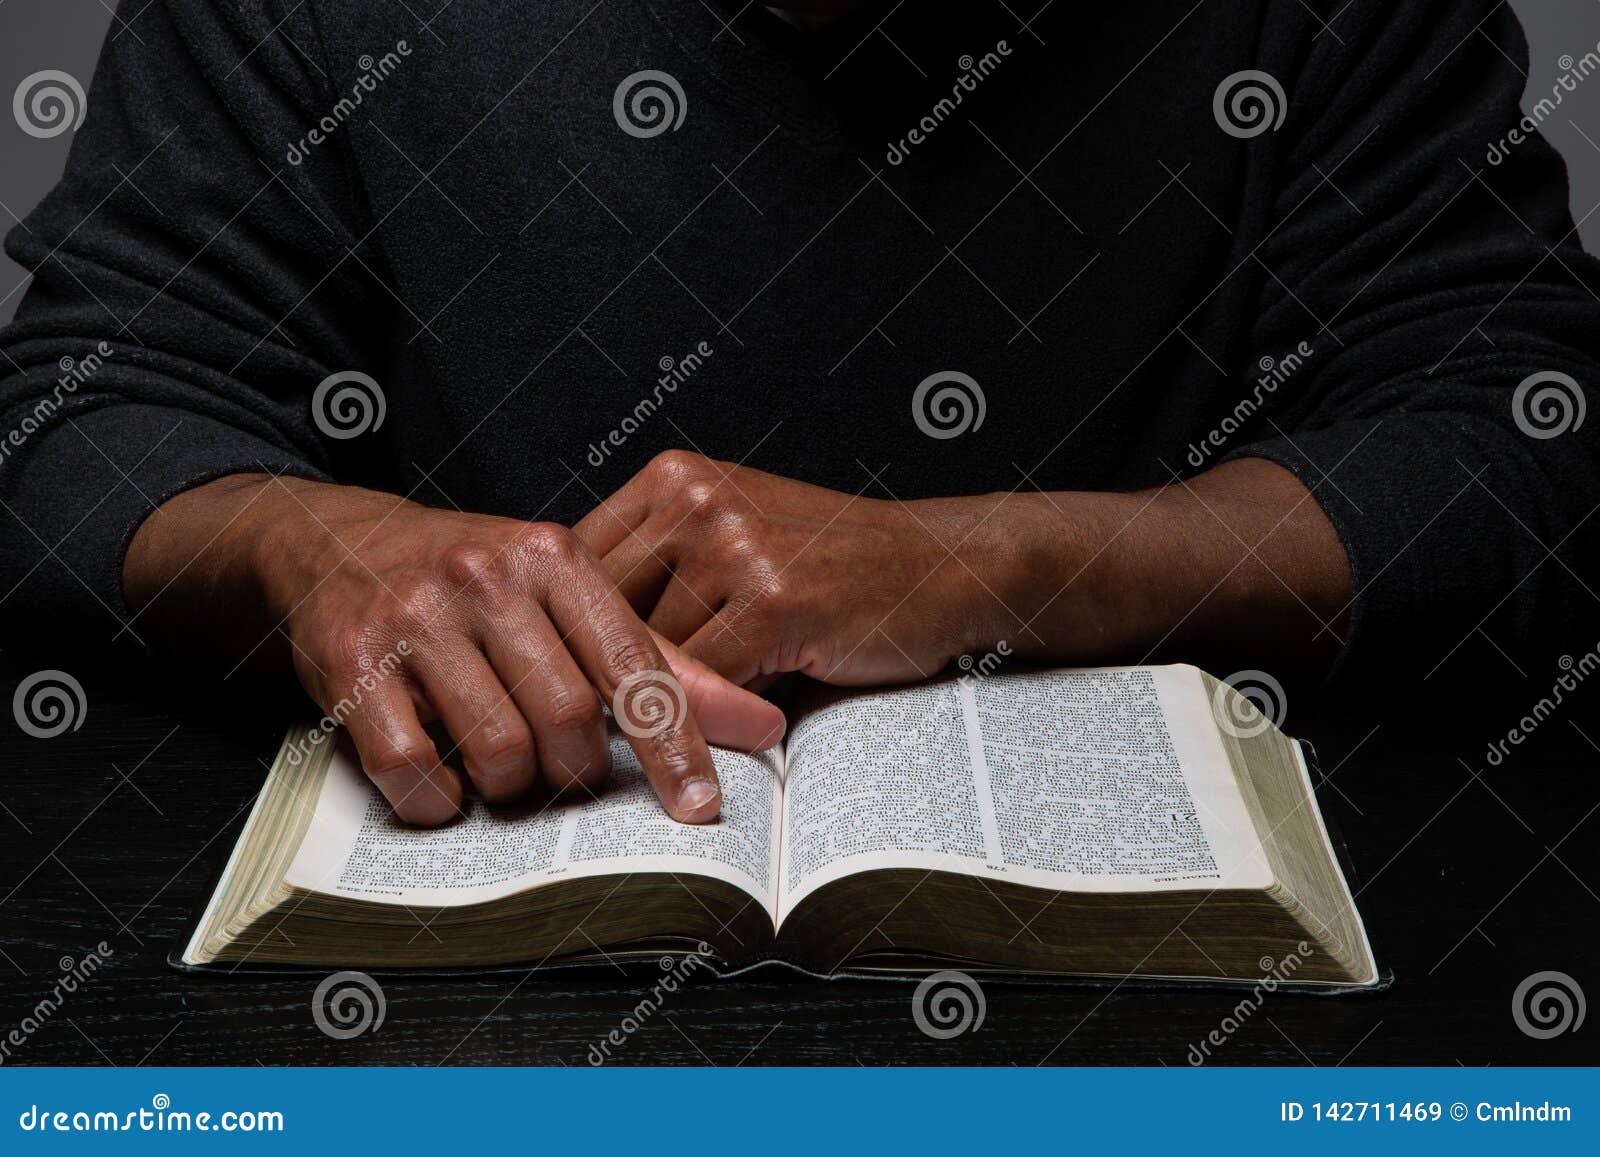 african american person studying the bible in dark room